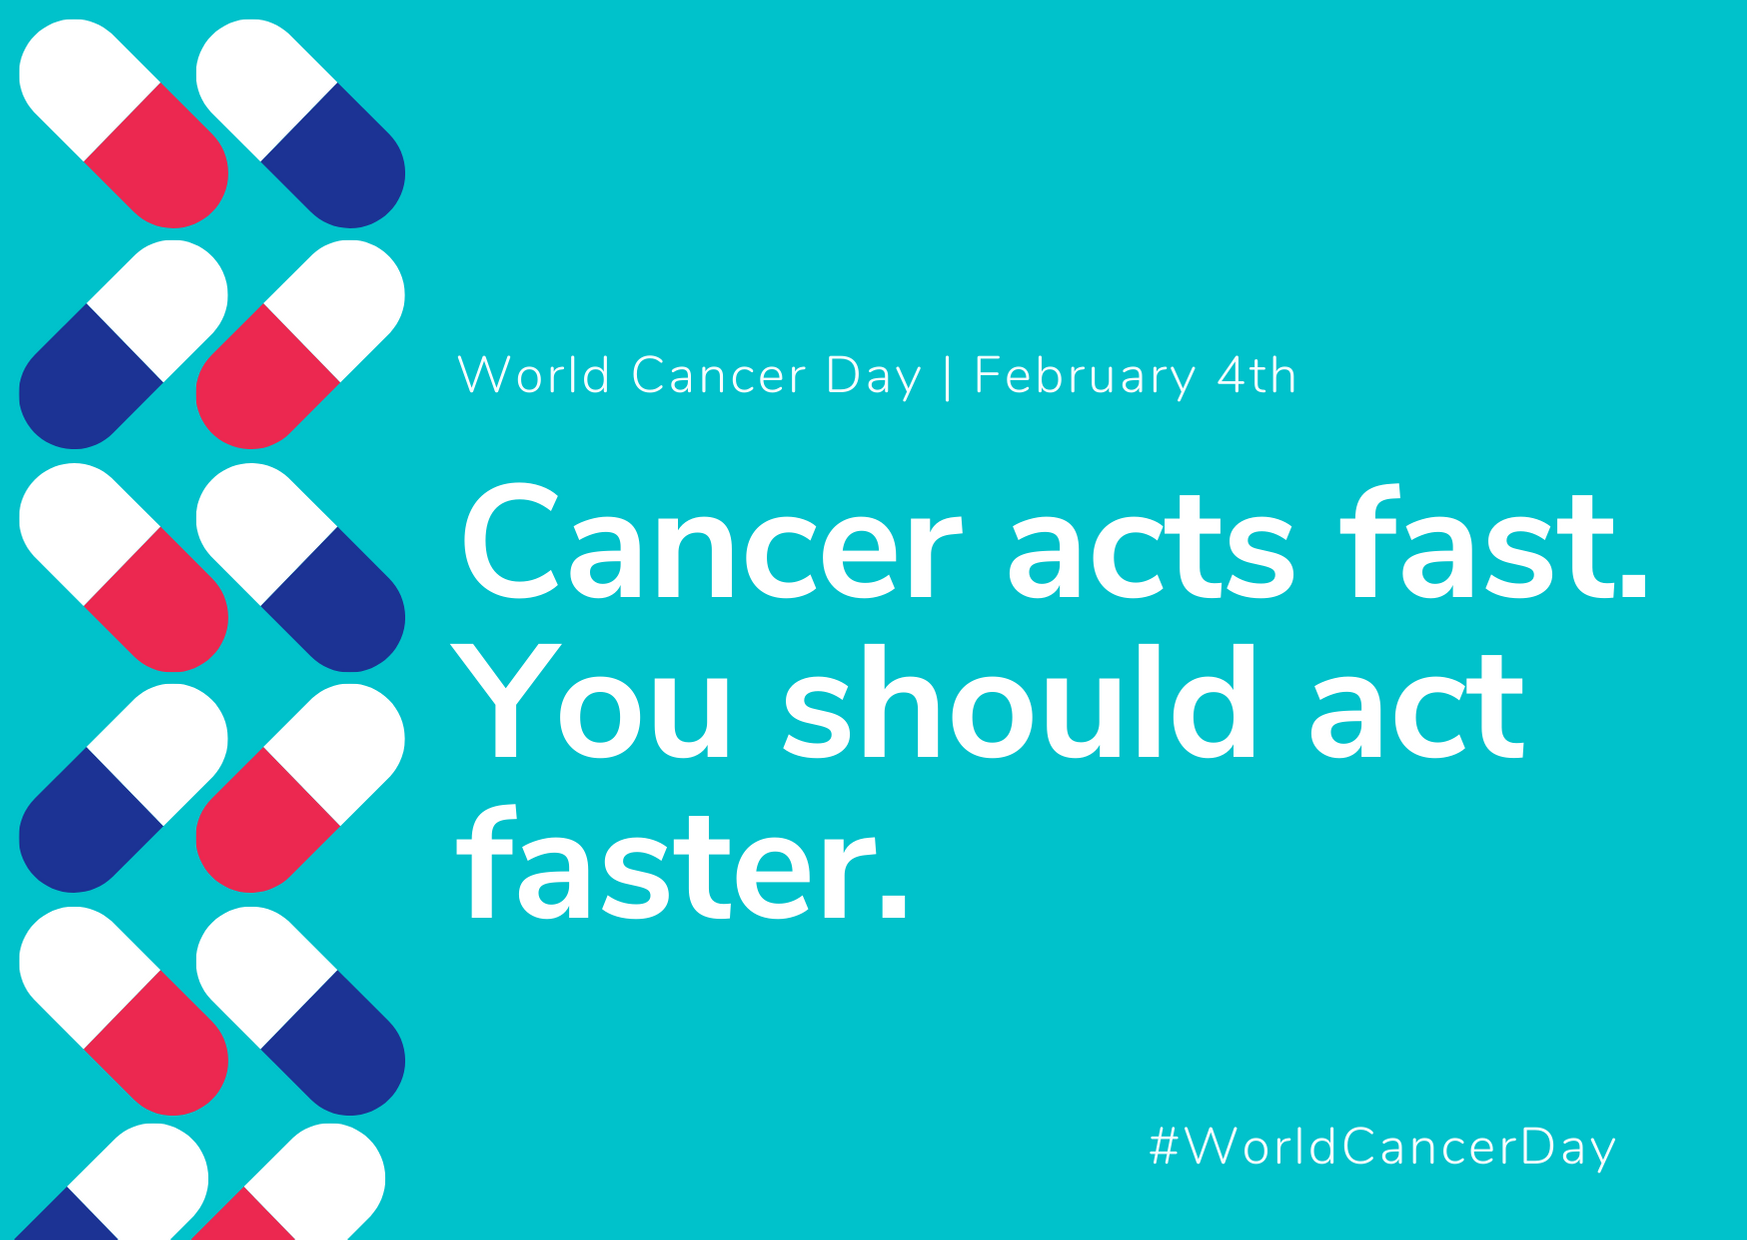 Cancer Acts Fast. You should Act Faster!